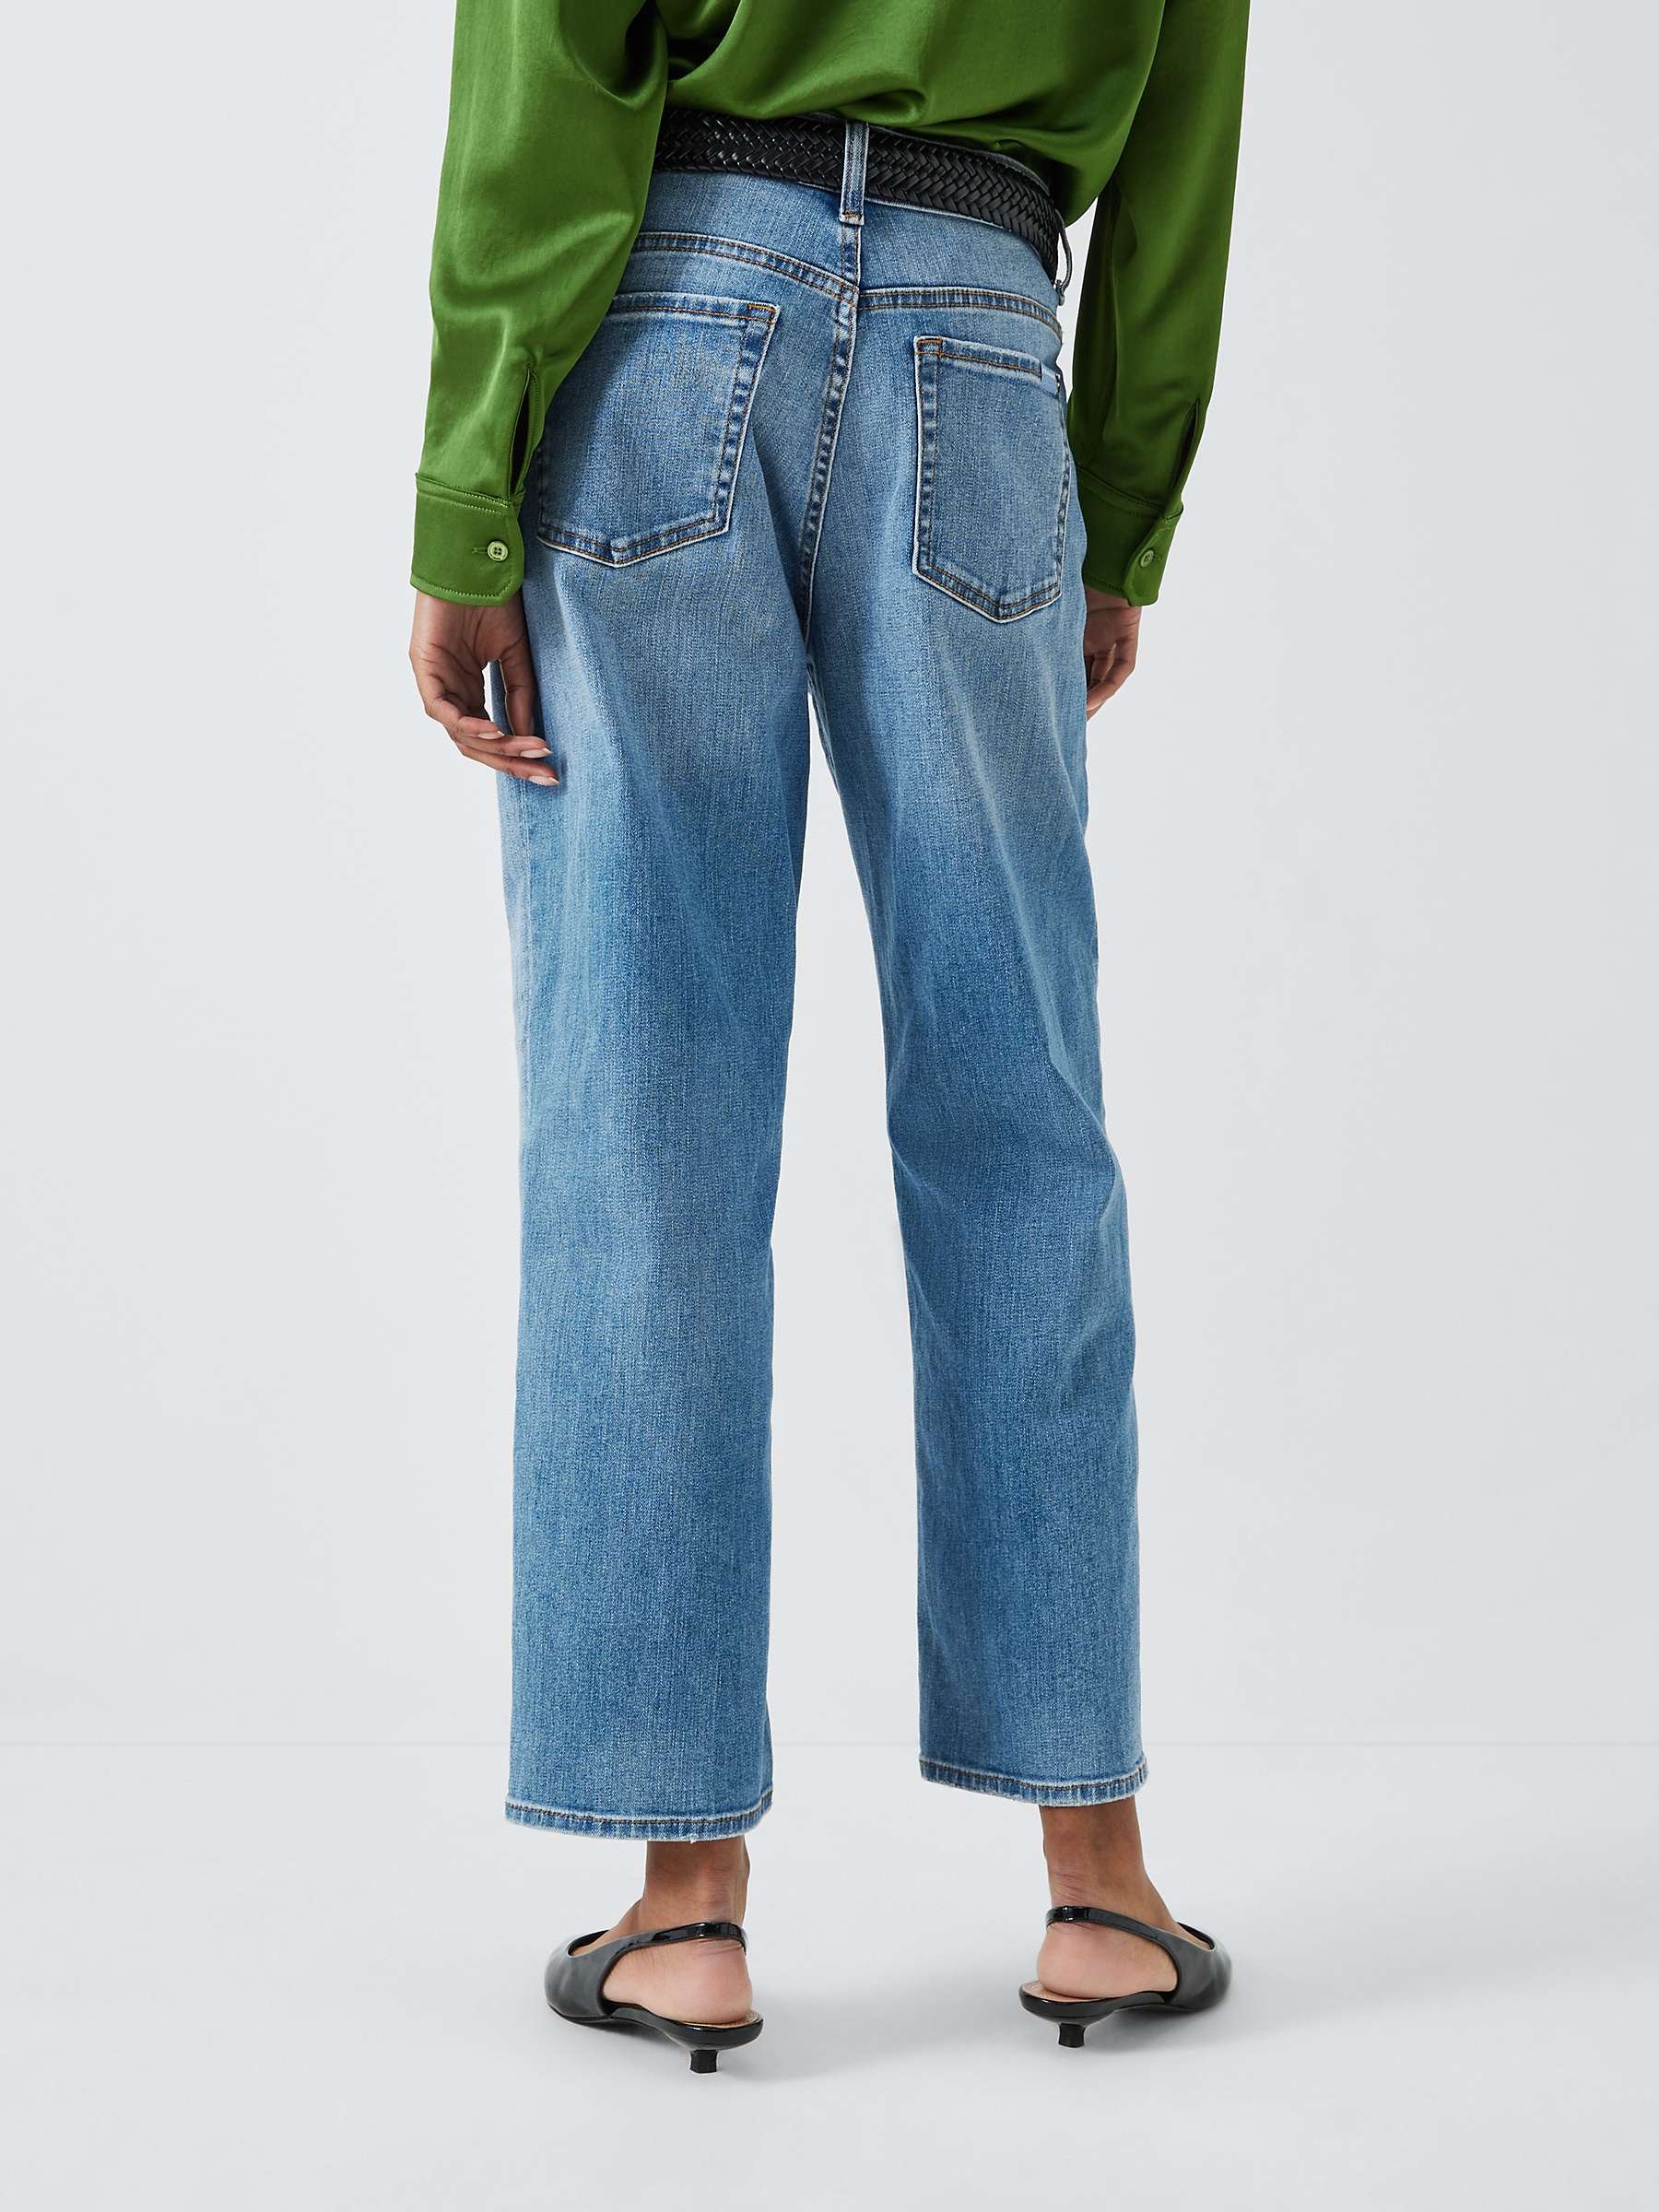 Buy 7 For All Mankind The Modern Straight Leg Jeans, Diary Online at johnlewis.com